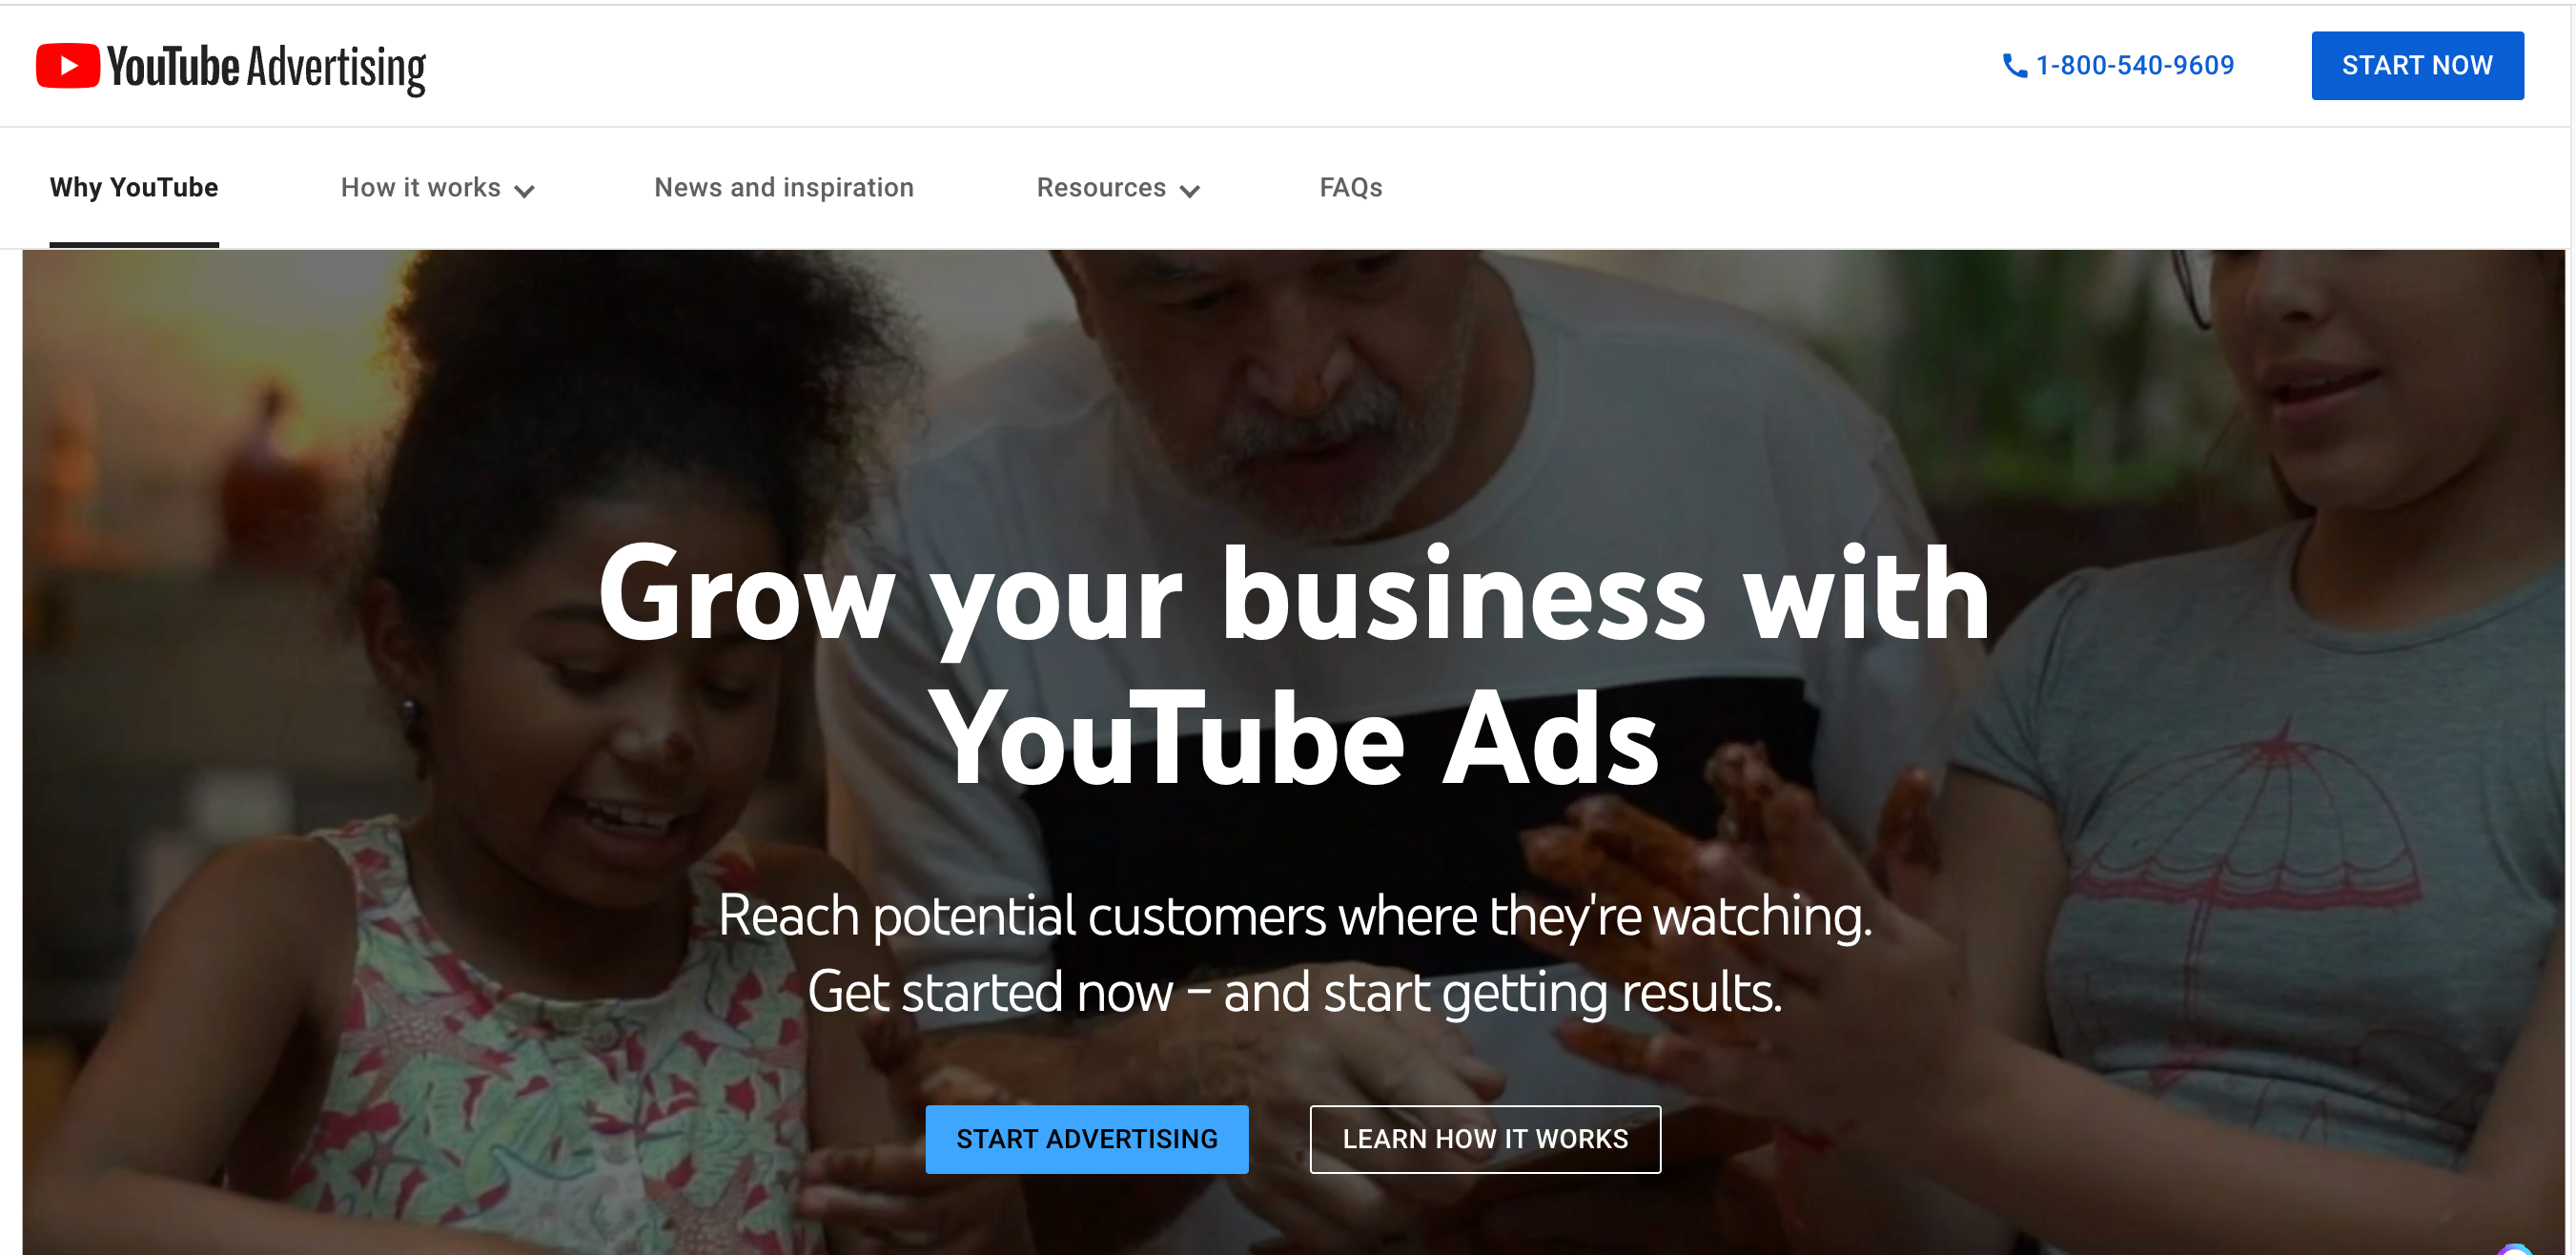 advertising a business with youtube ads - paid ads, small businesses